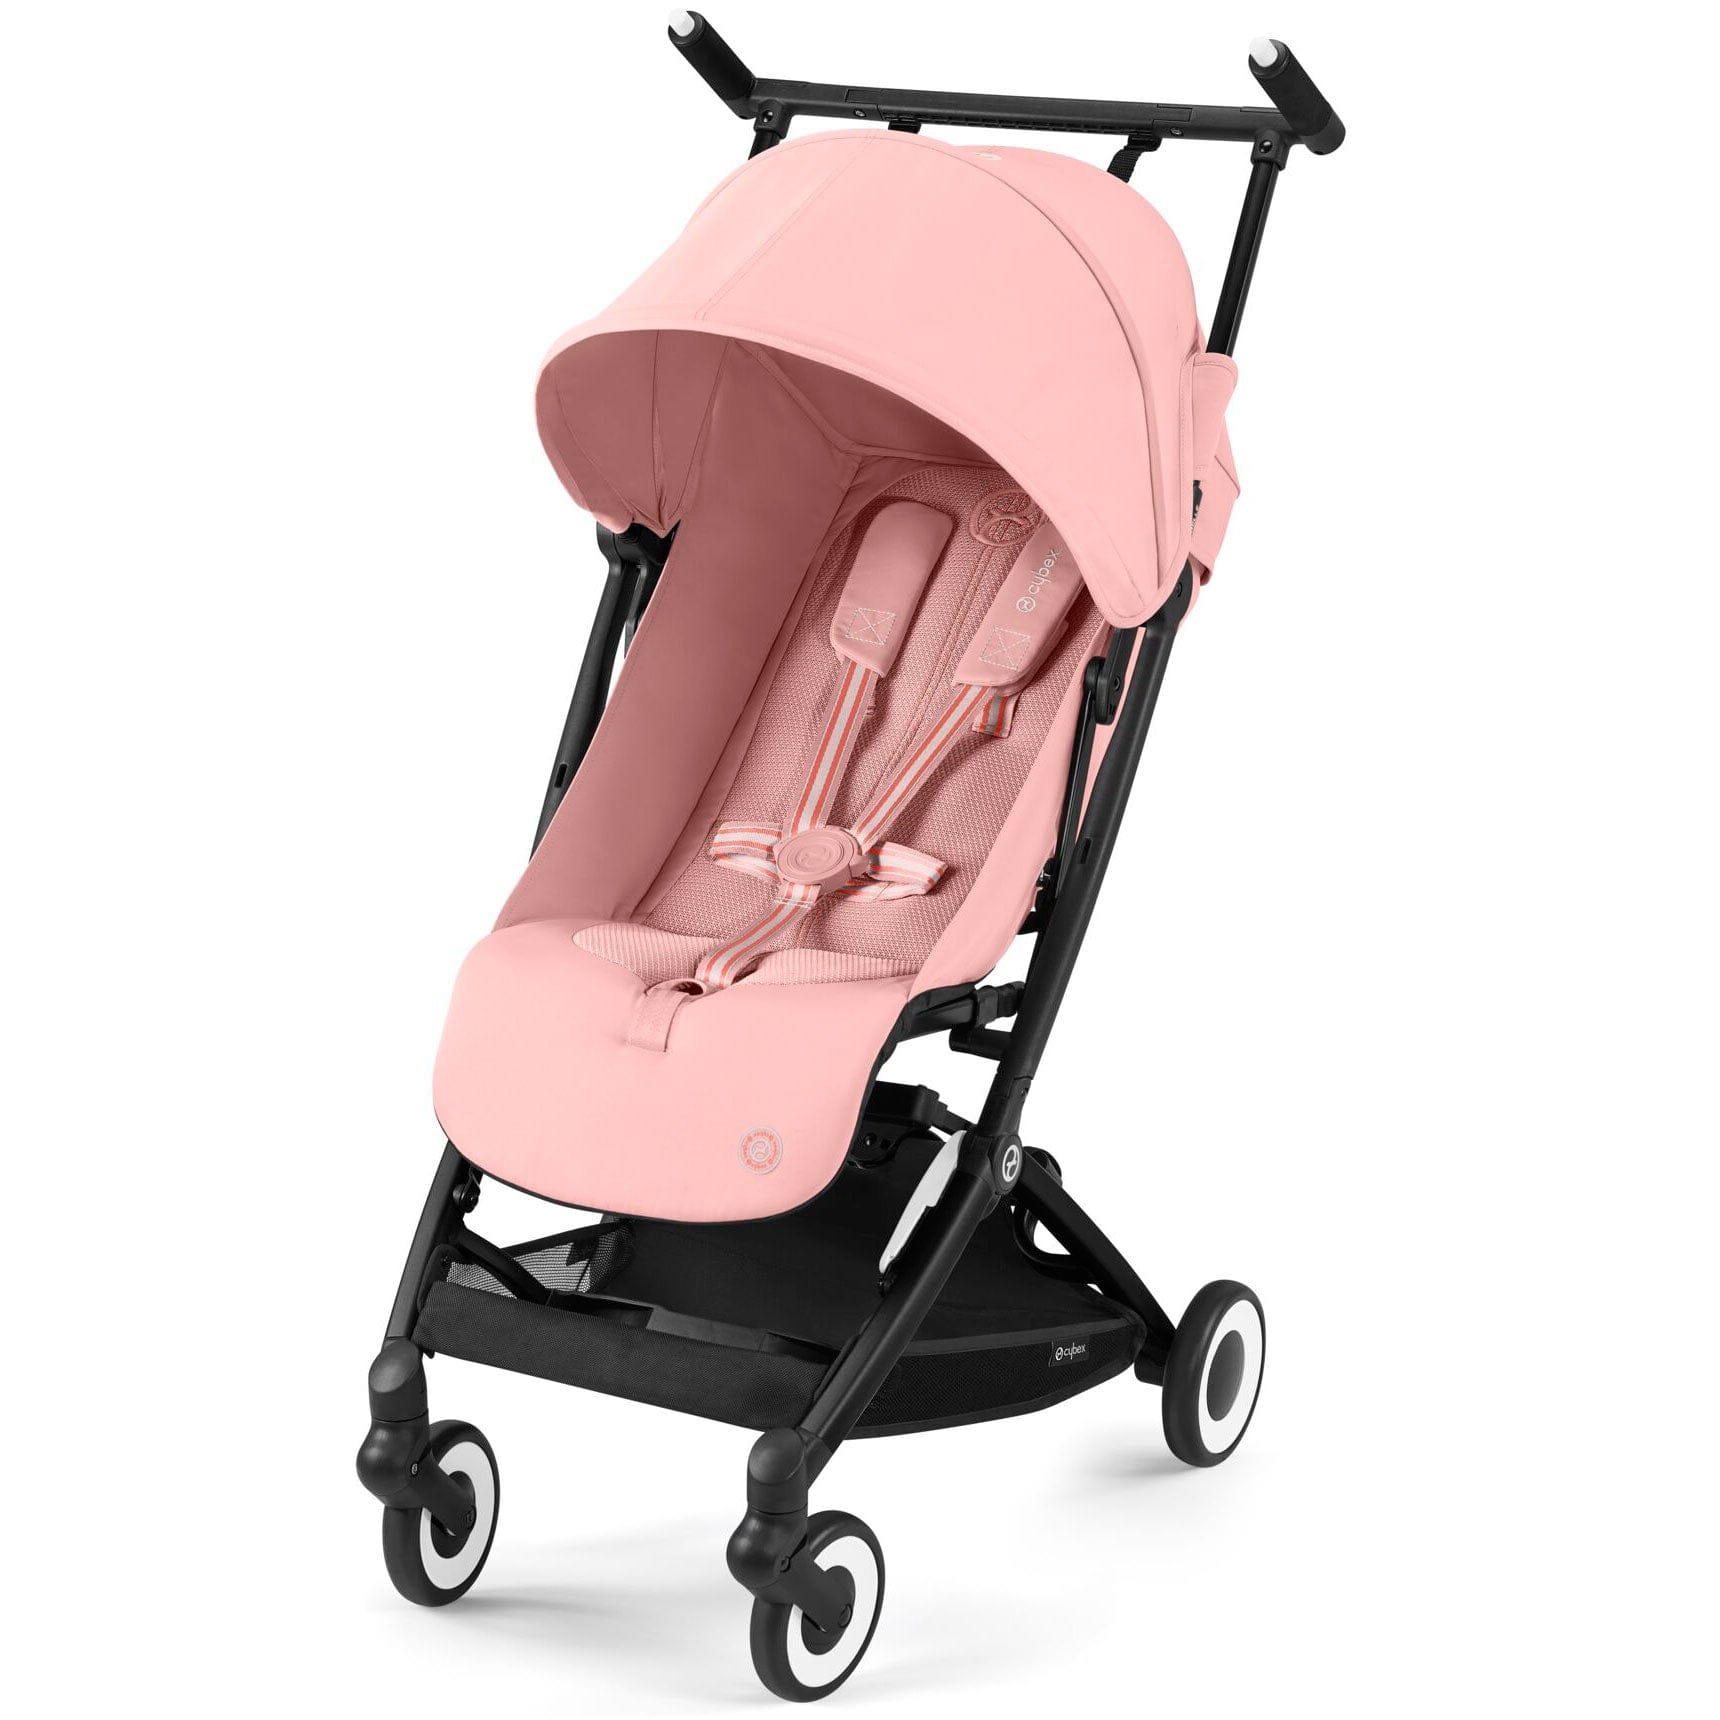 Cybex baby pushchairs Cybex Libelle Candy Pink 524000255